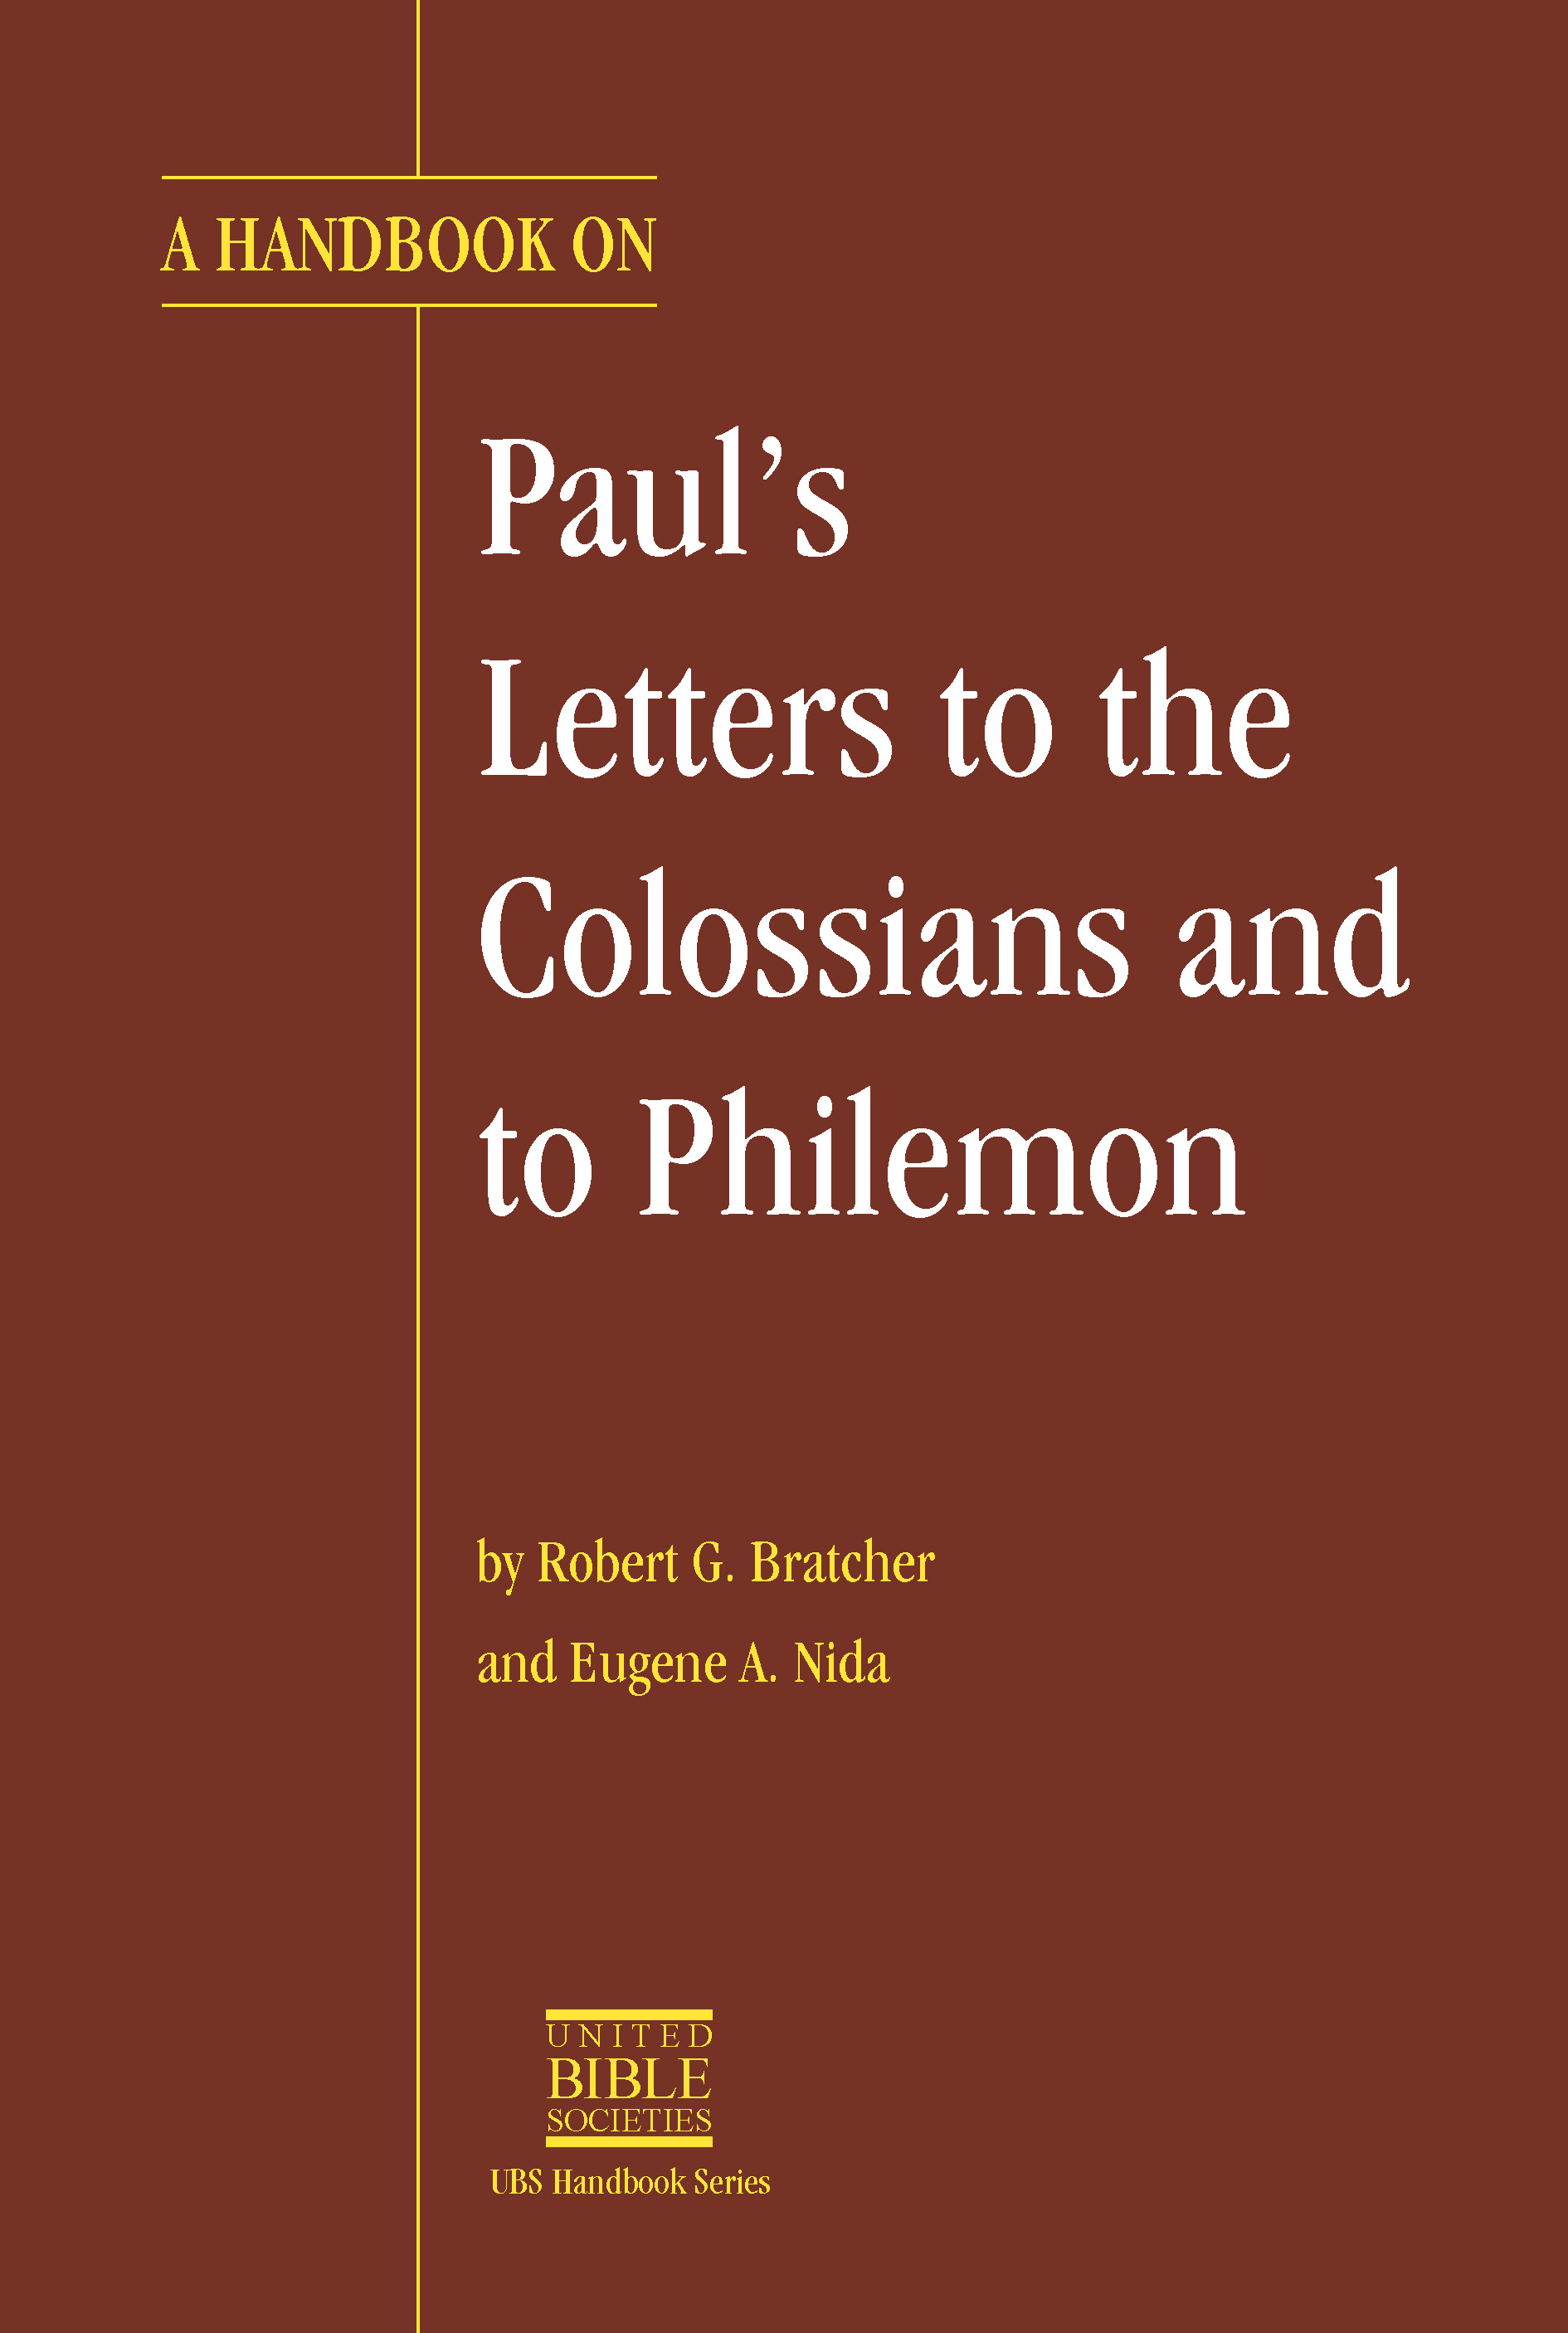 Store　Philemon　Global　Letter　UBS　A　Handbook　to　–　on　Colossians　Paul's　the